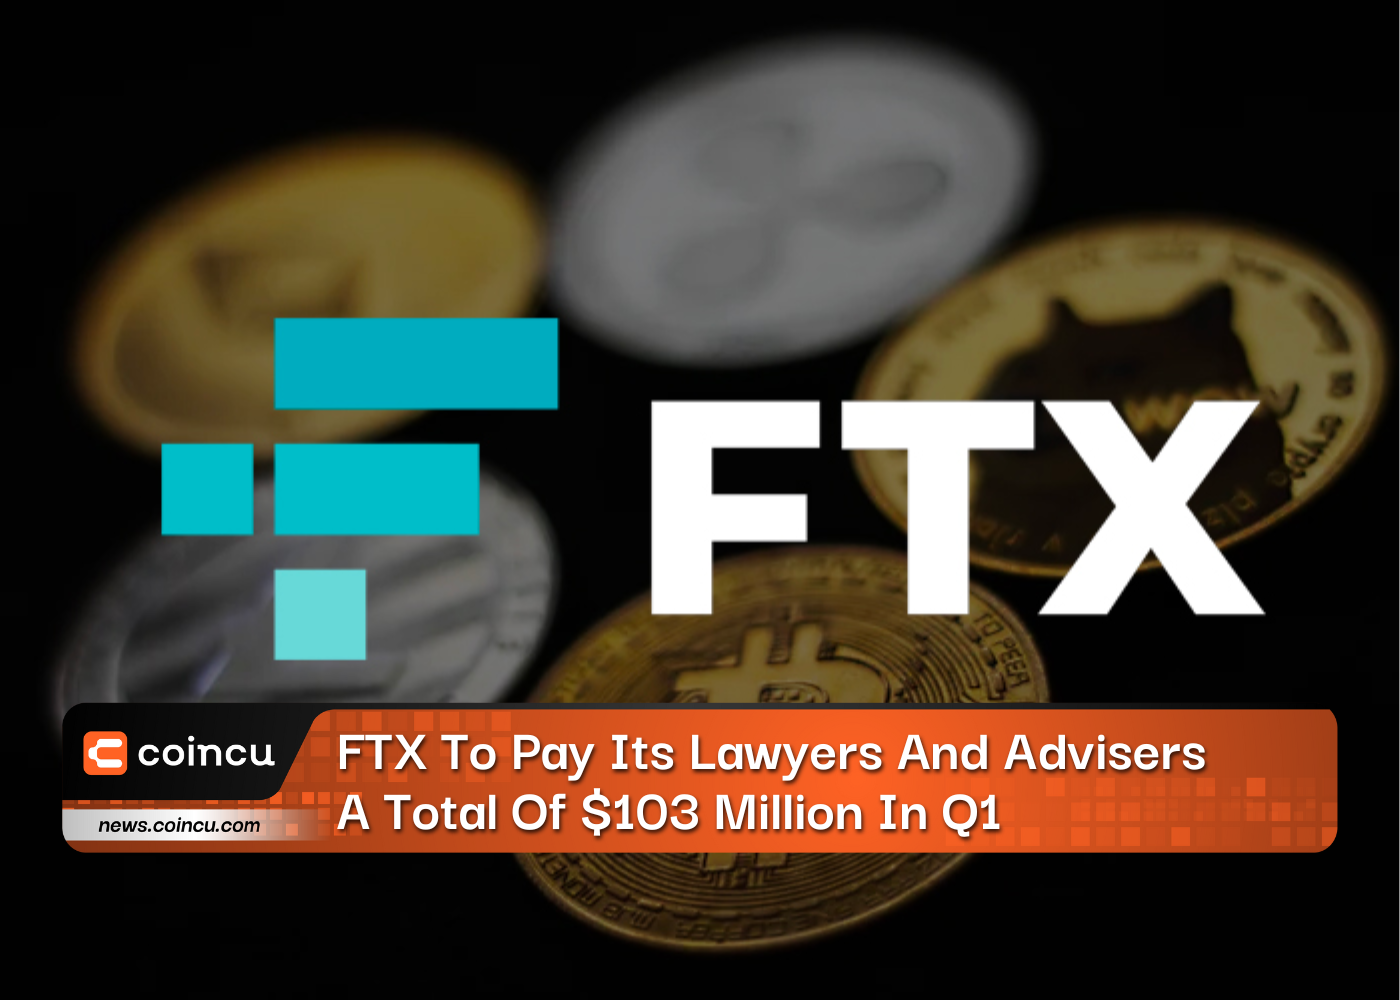 FTX To Pay Its Lawyers And Advisers A Total Of $103 Million In Q1